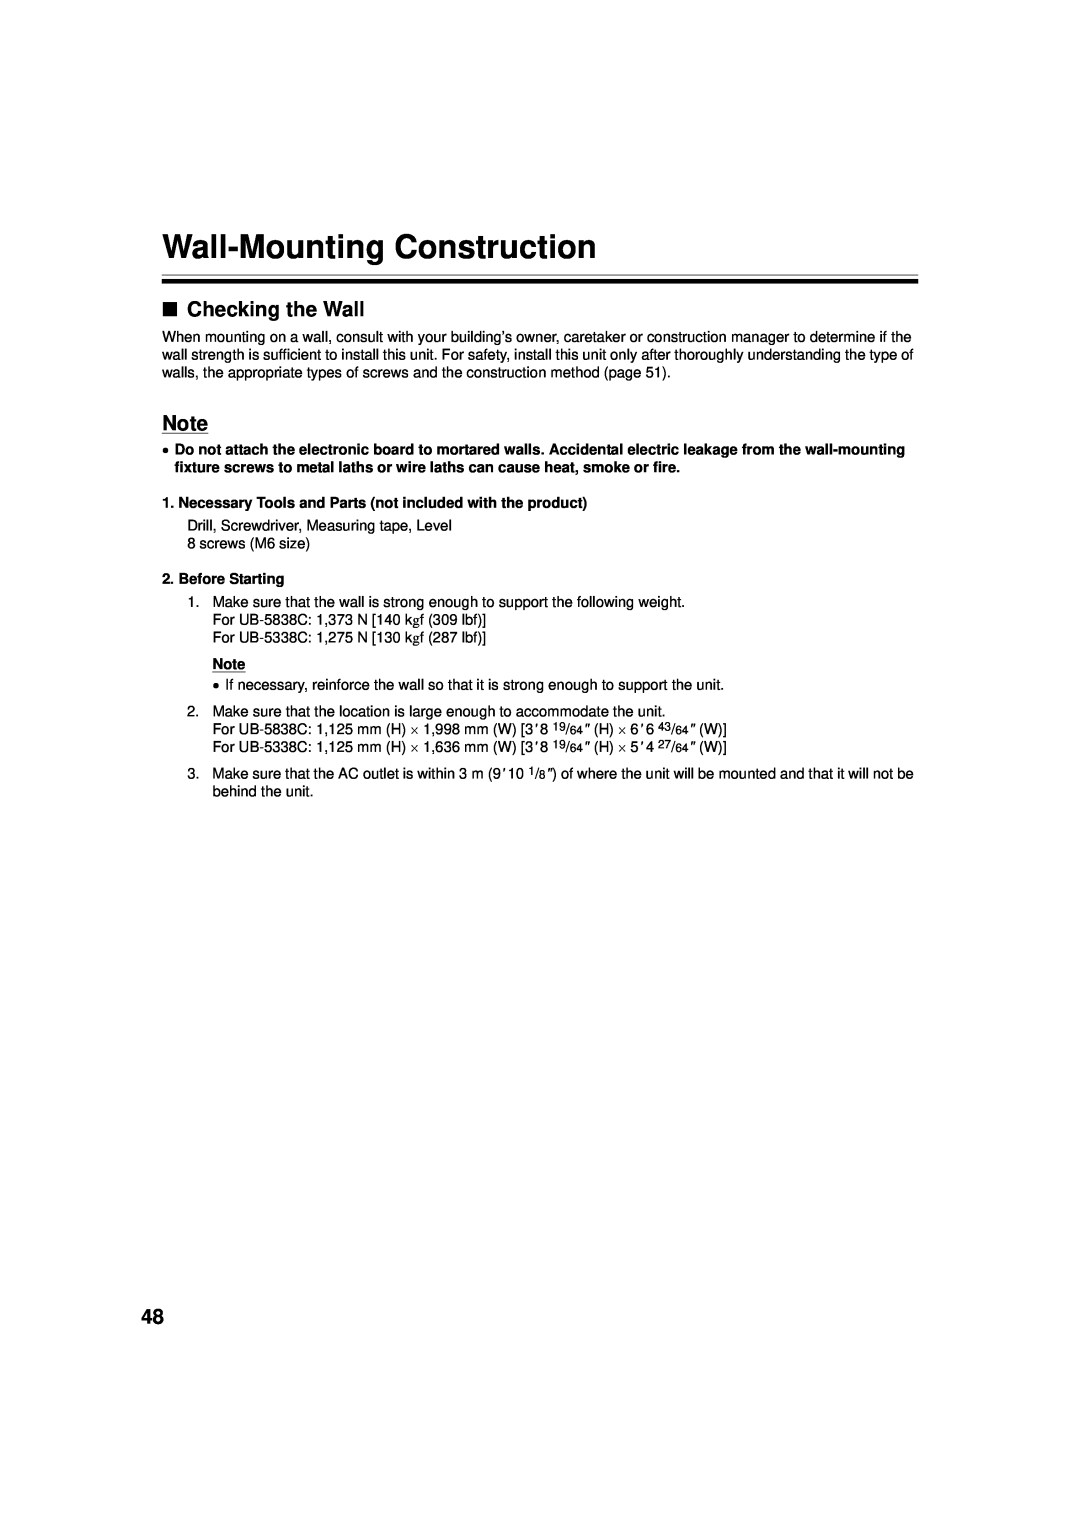 Panasonic UB-5838C Wall-Mounting Construction, Checking the Wall, Necessary Tools and Parts not included with the product 